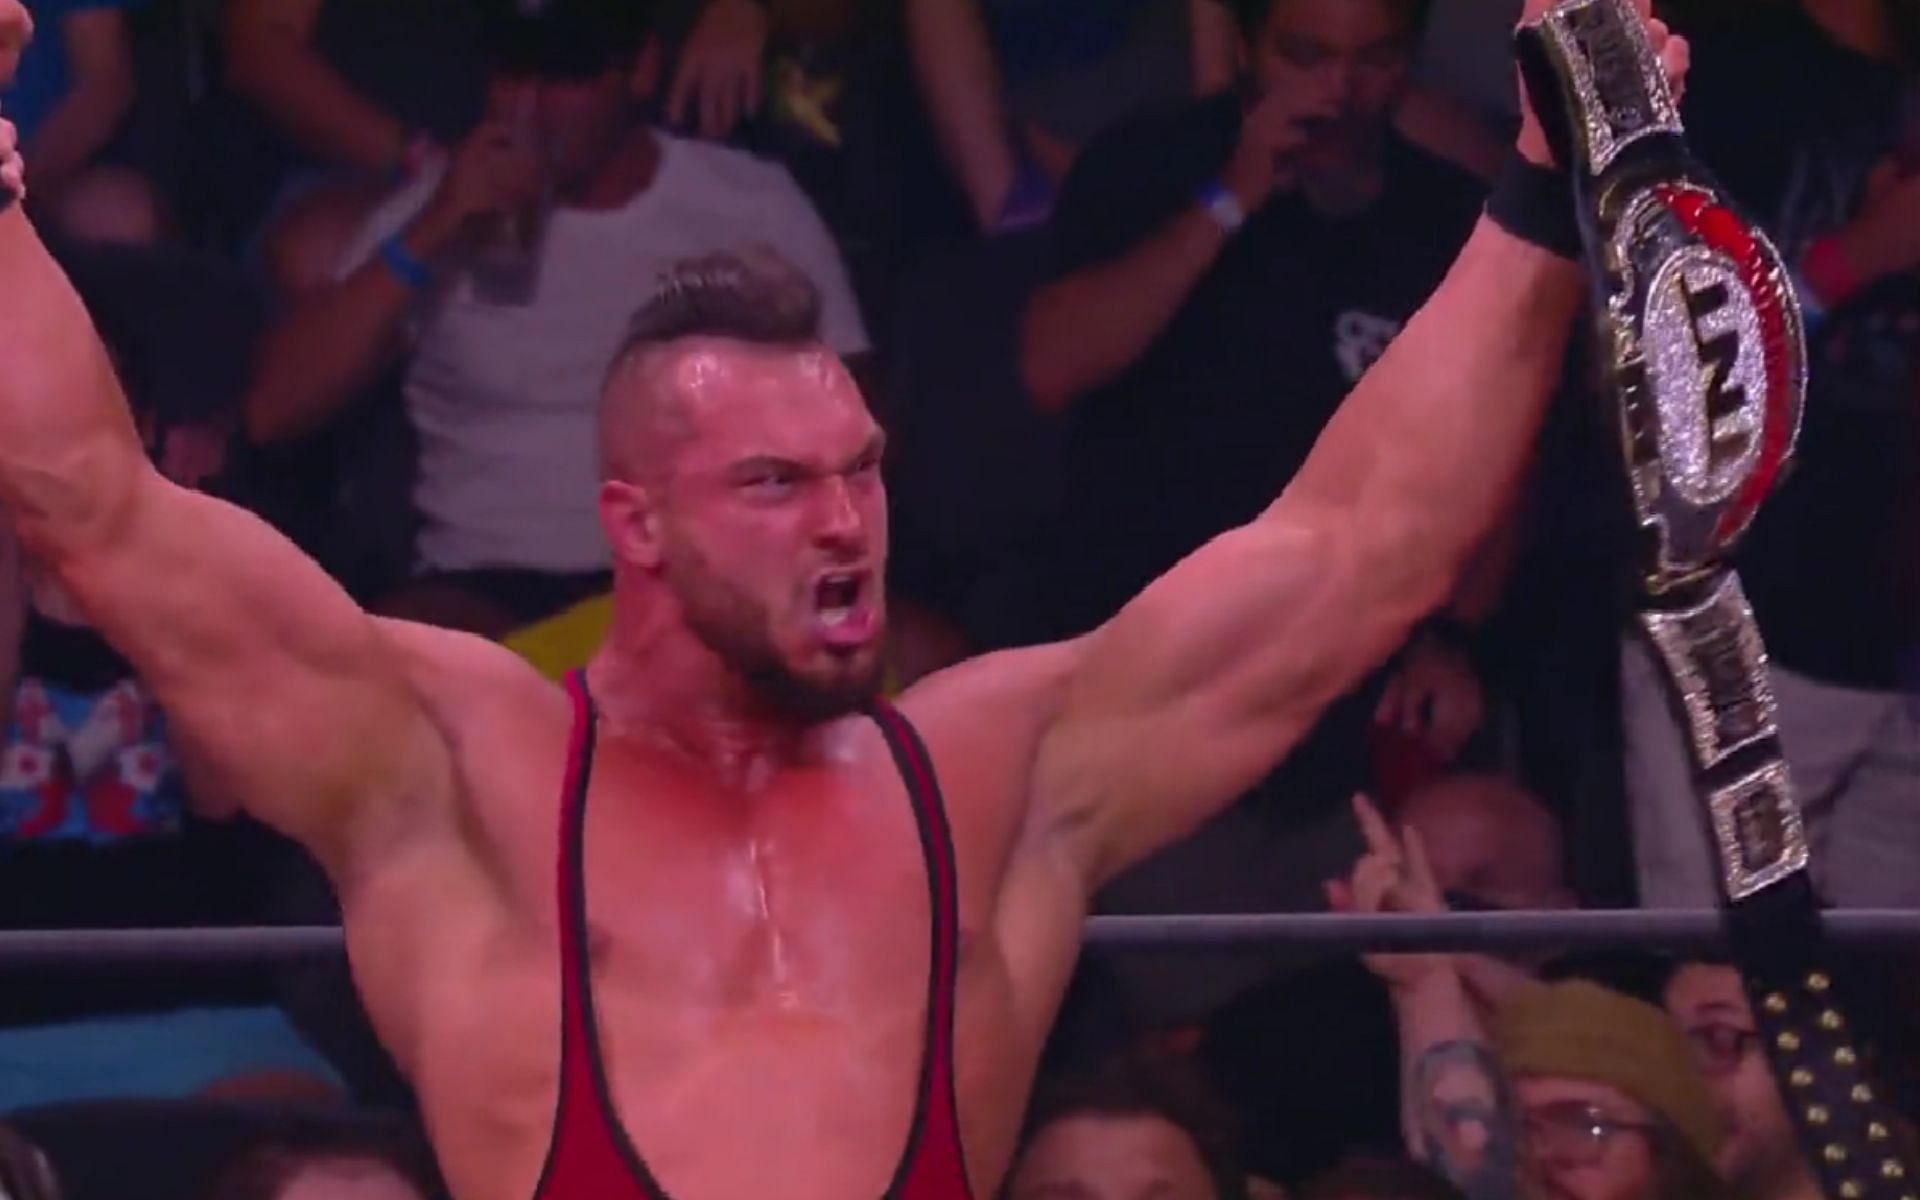 The AEW TNT Championship was defended earlier on Dynamite.